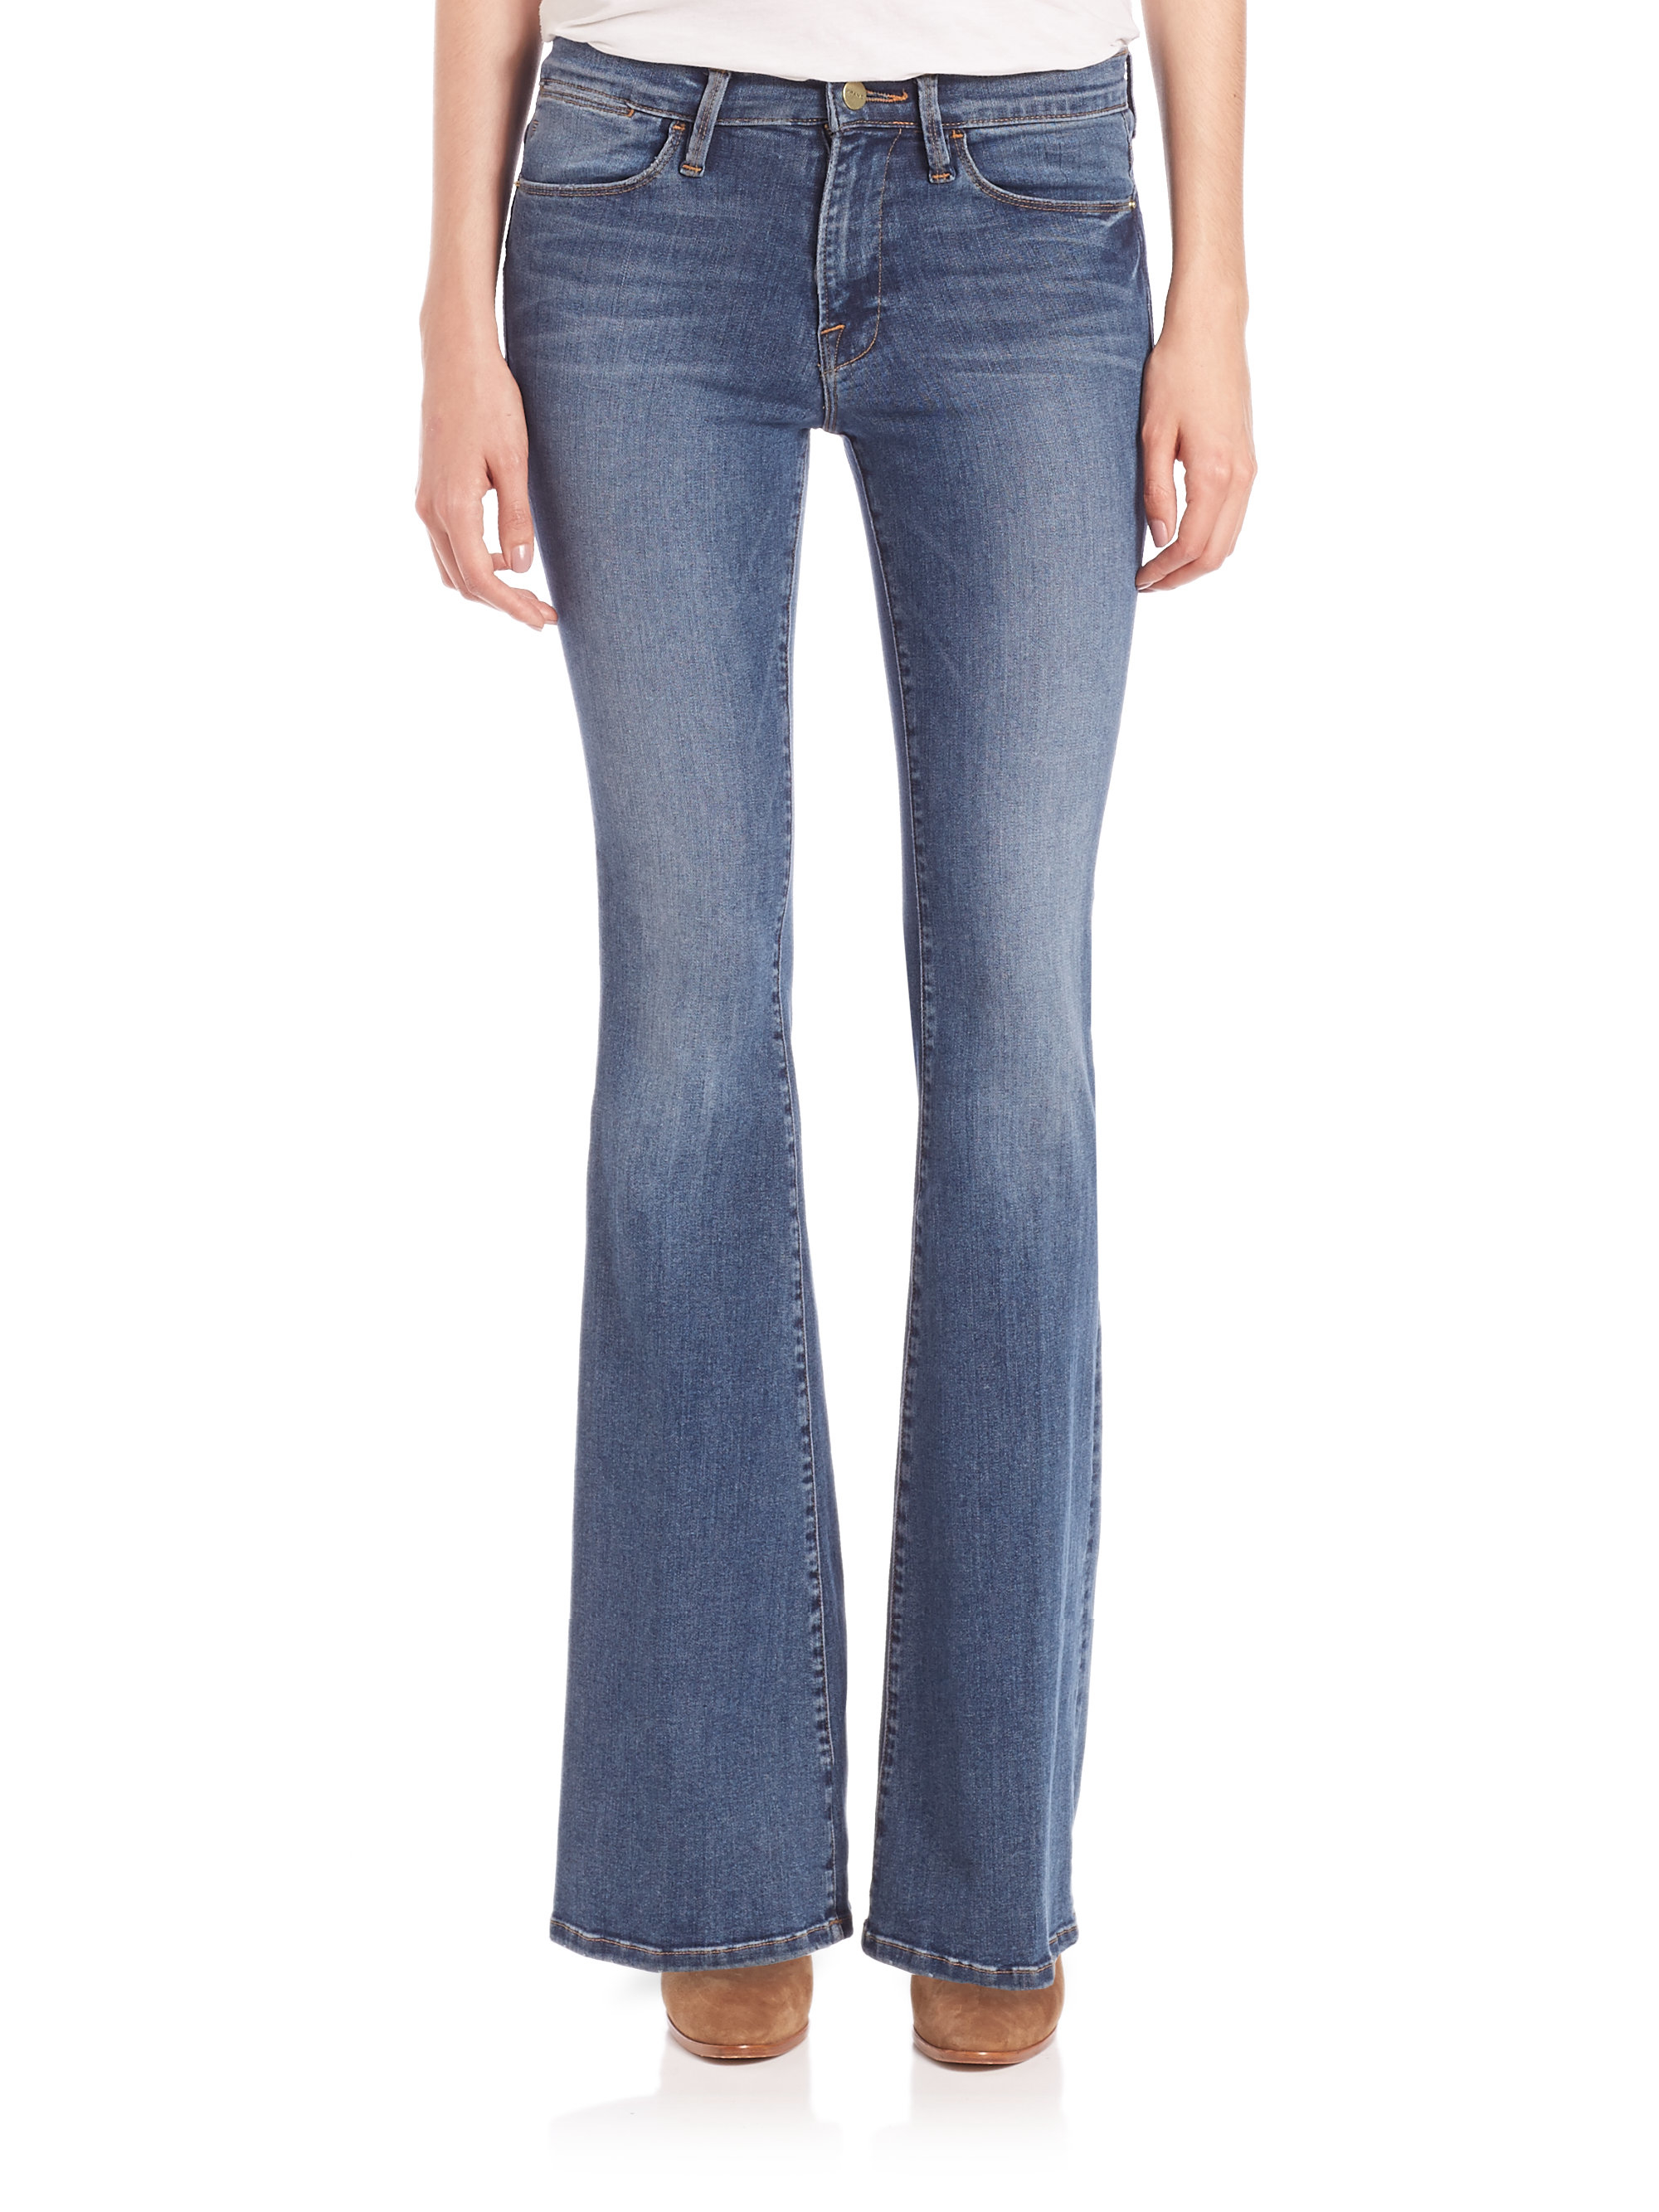 Lyst - Frame Le High-rise Flared Jeans in Blue